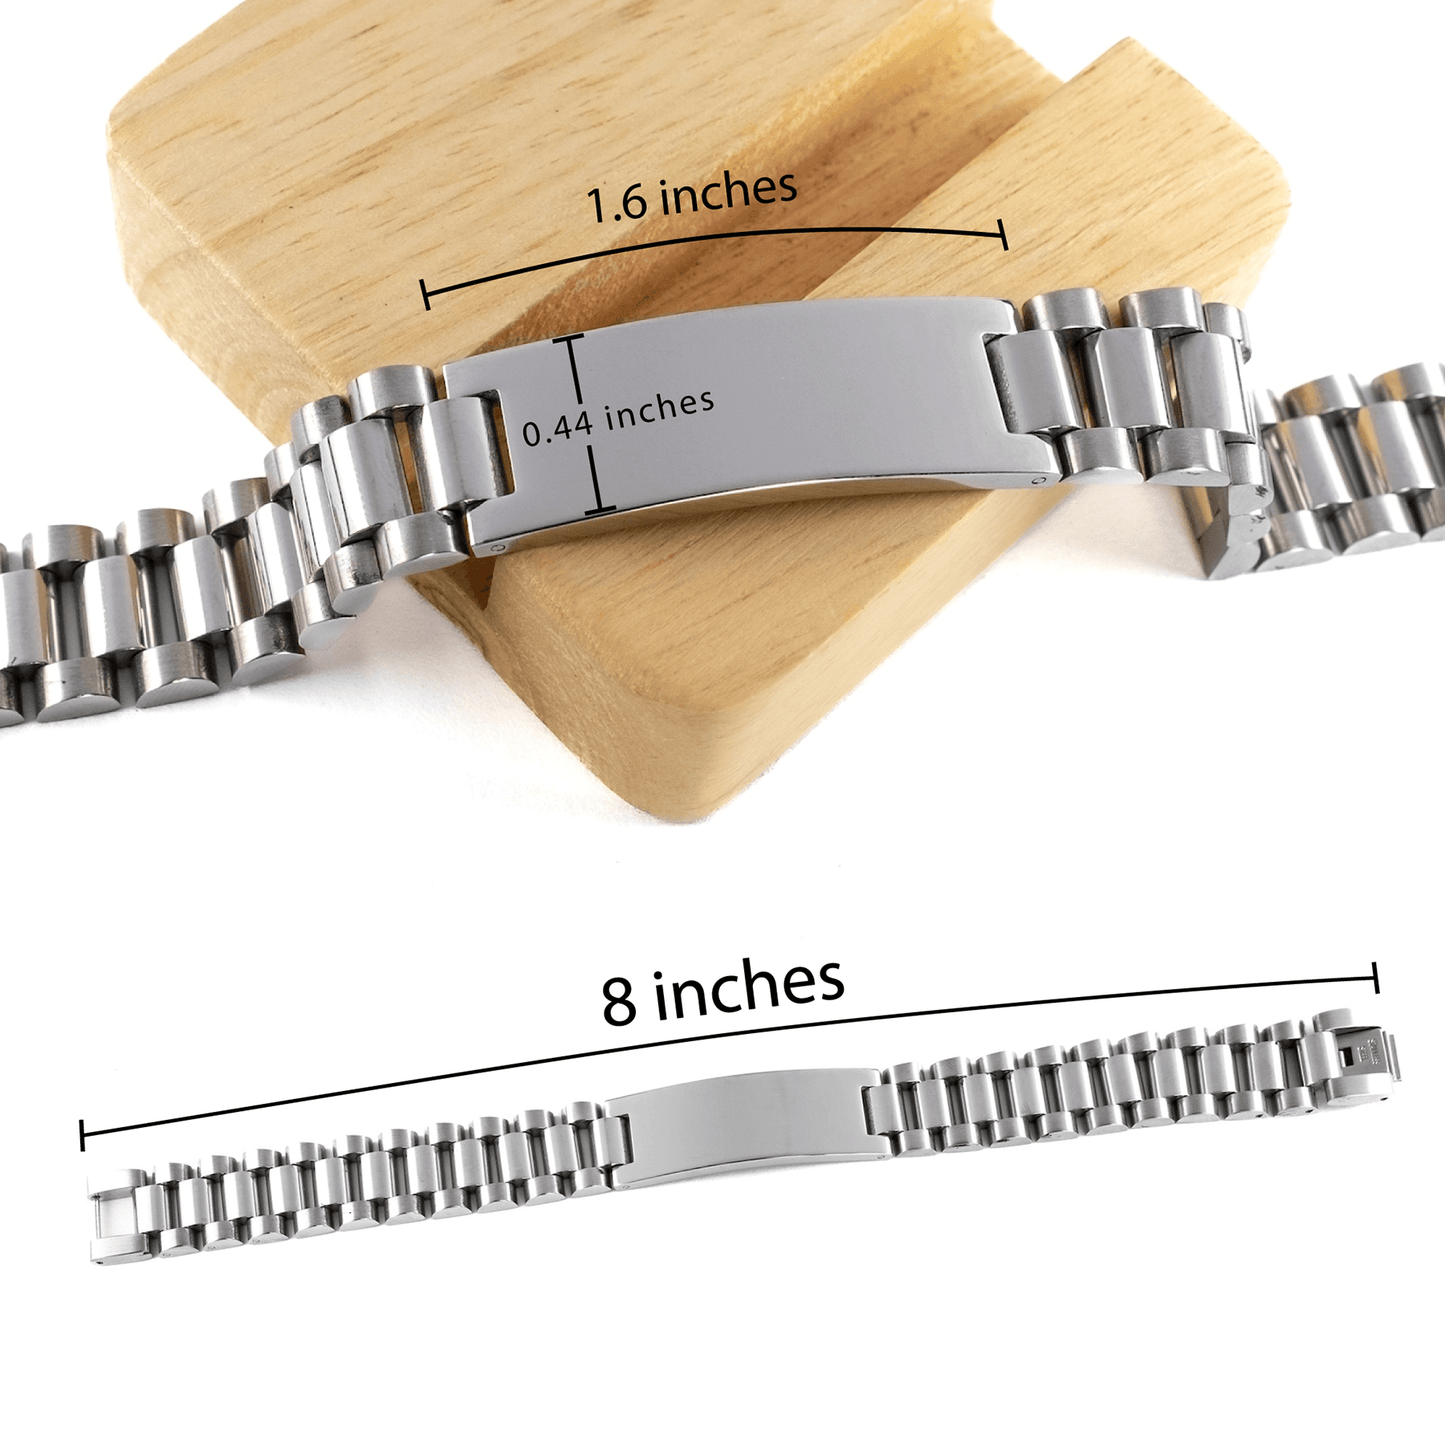 Remarkable General Manager Gifts, Your dedication and hard work, Inspirational Birthday Christmas Unique Ladder Stainless Steel Bracelet For General Manager, Coworkers, Men, Women, Friends - Mallard Moon Gift Shop